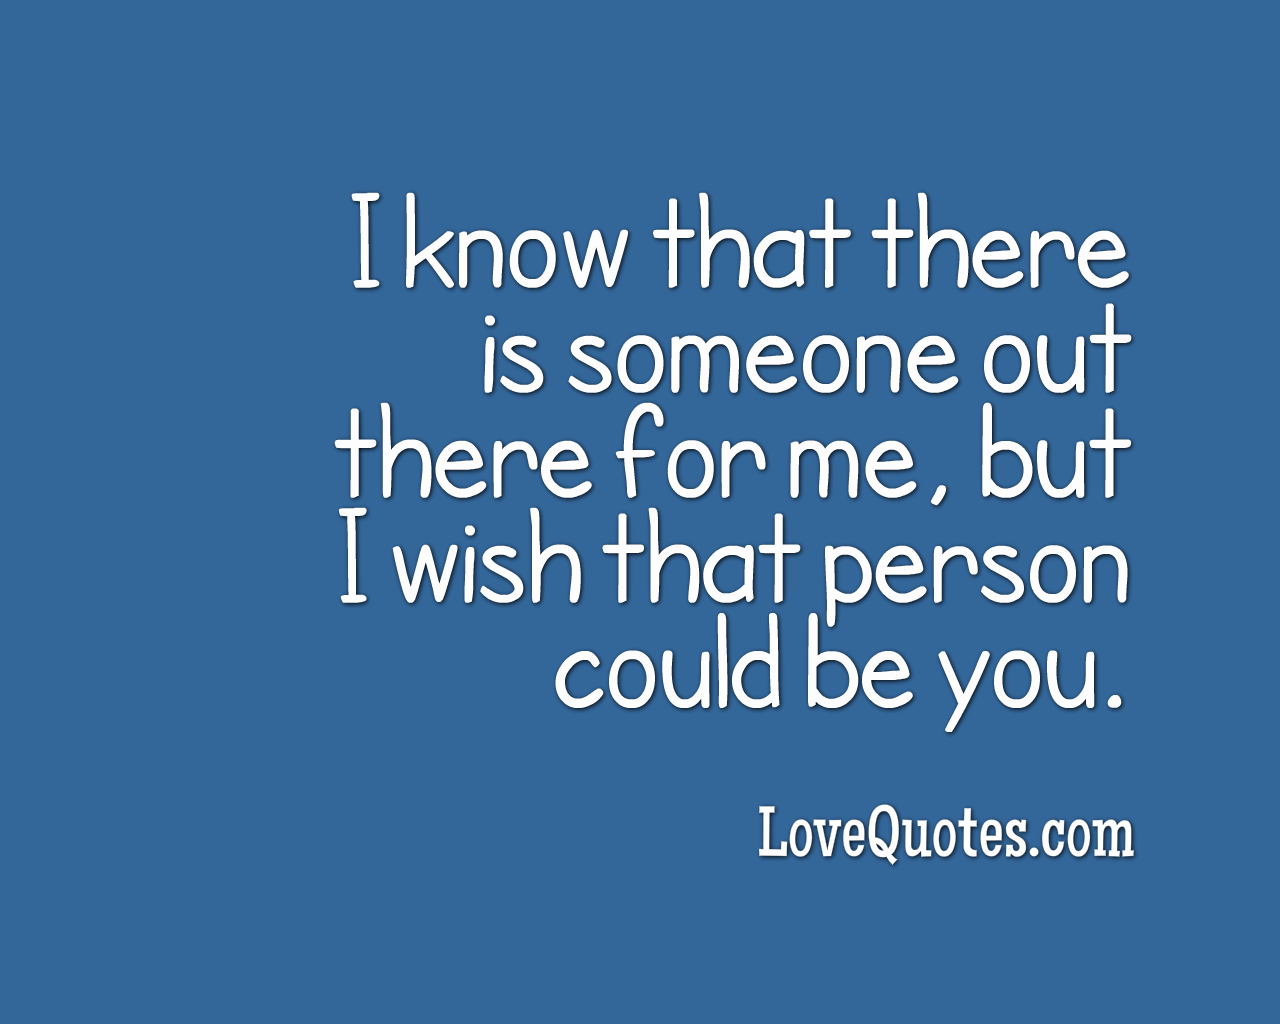 Someone Out There - Love Quotes